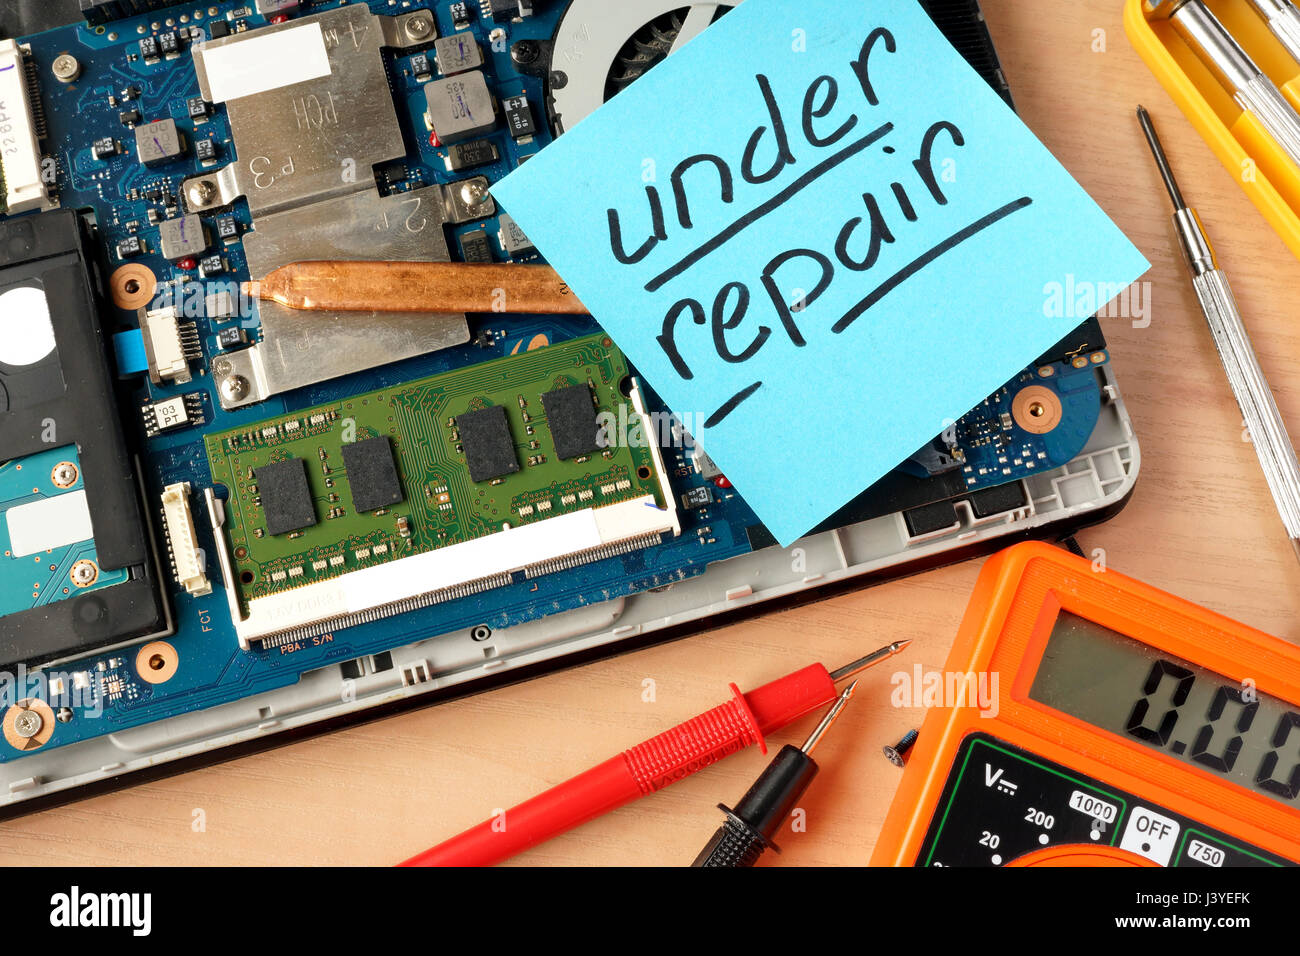 Broken laptop and stick with words under repair. Stock Photo